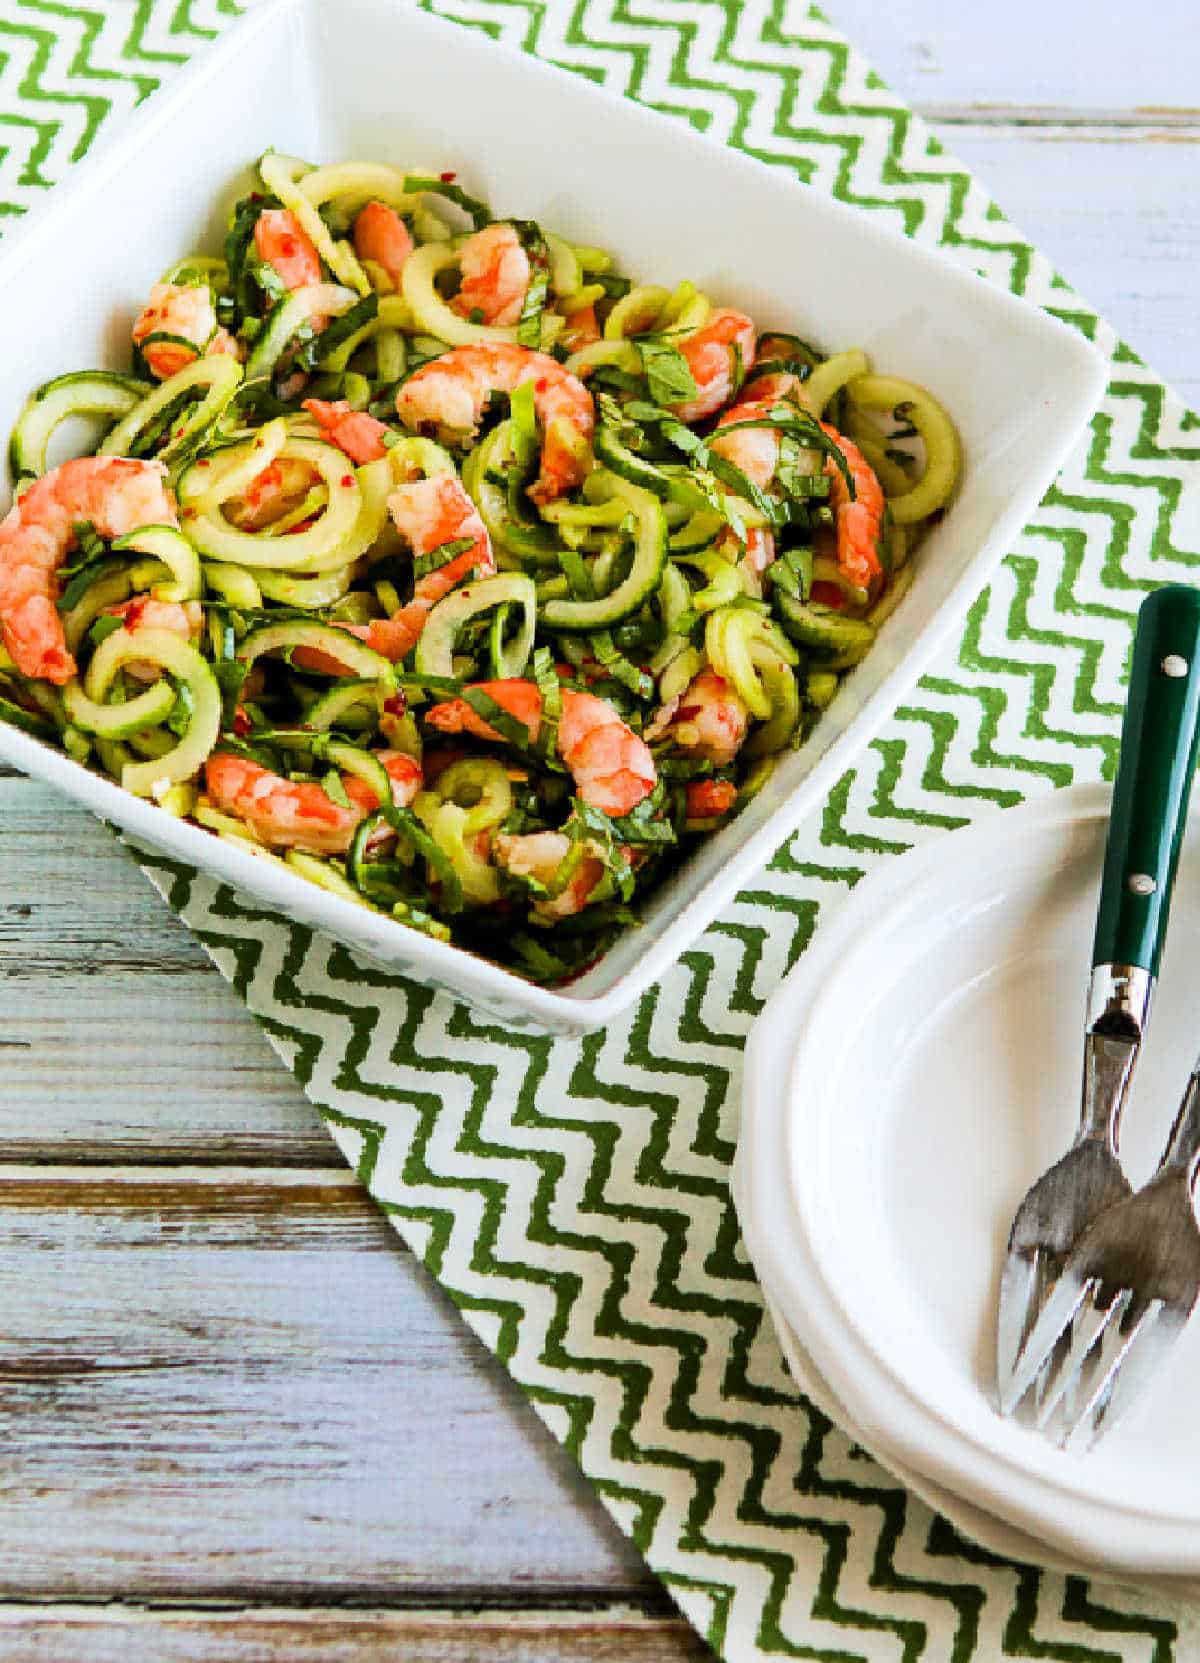 Cucumber Noodle Salad with Shrimp shown in serving bowl with napkin, plates, and forks